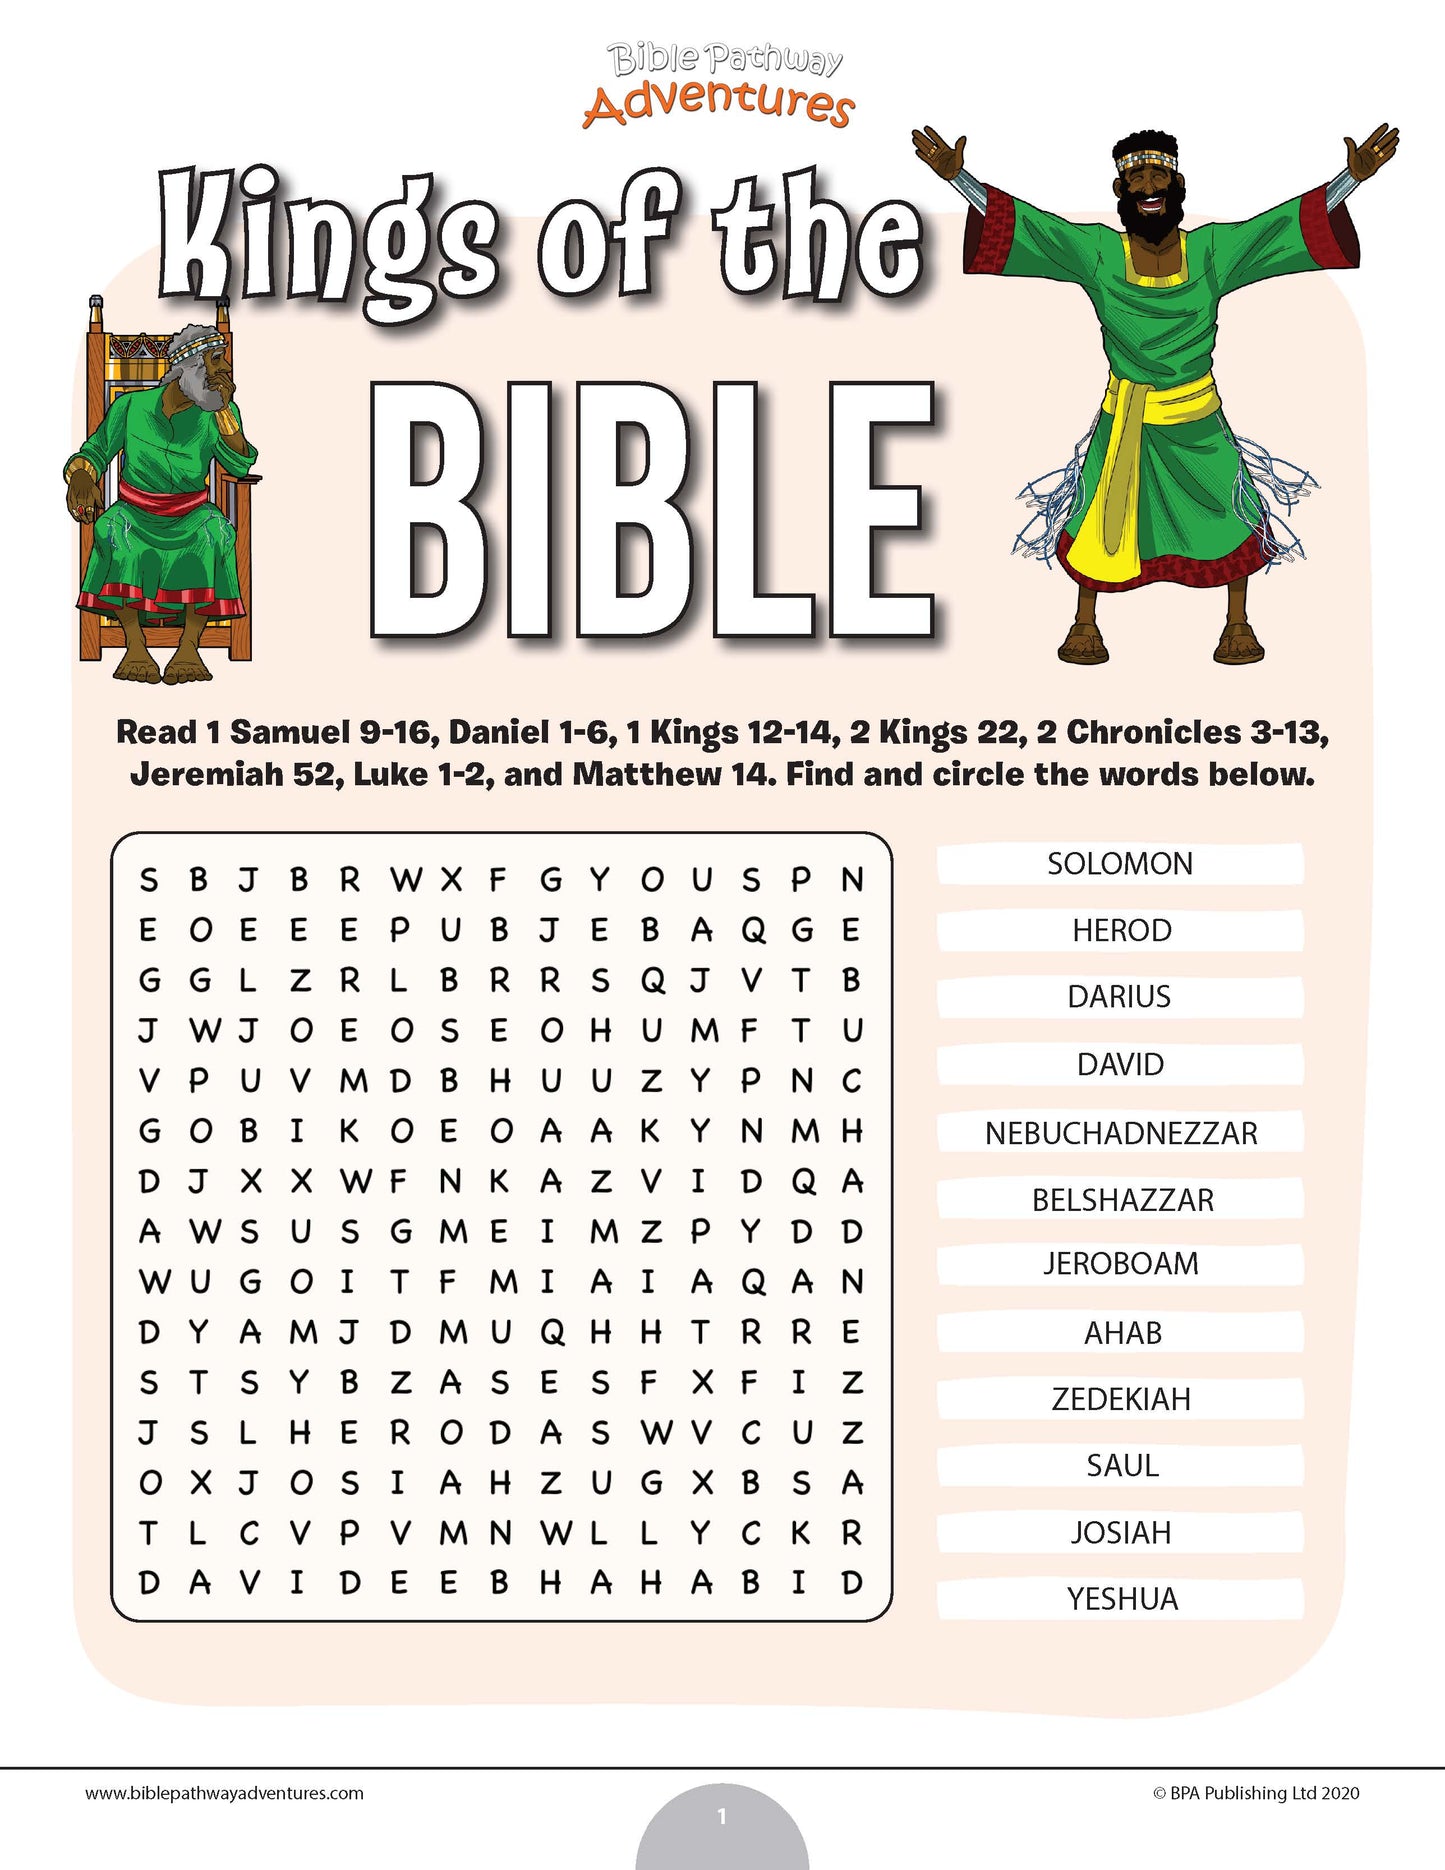 Kings of the Bible word search (PDF)